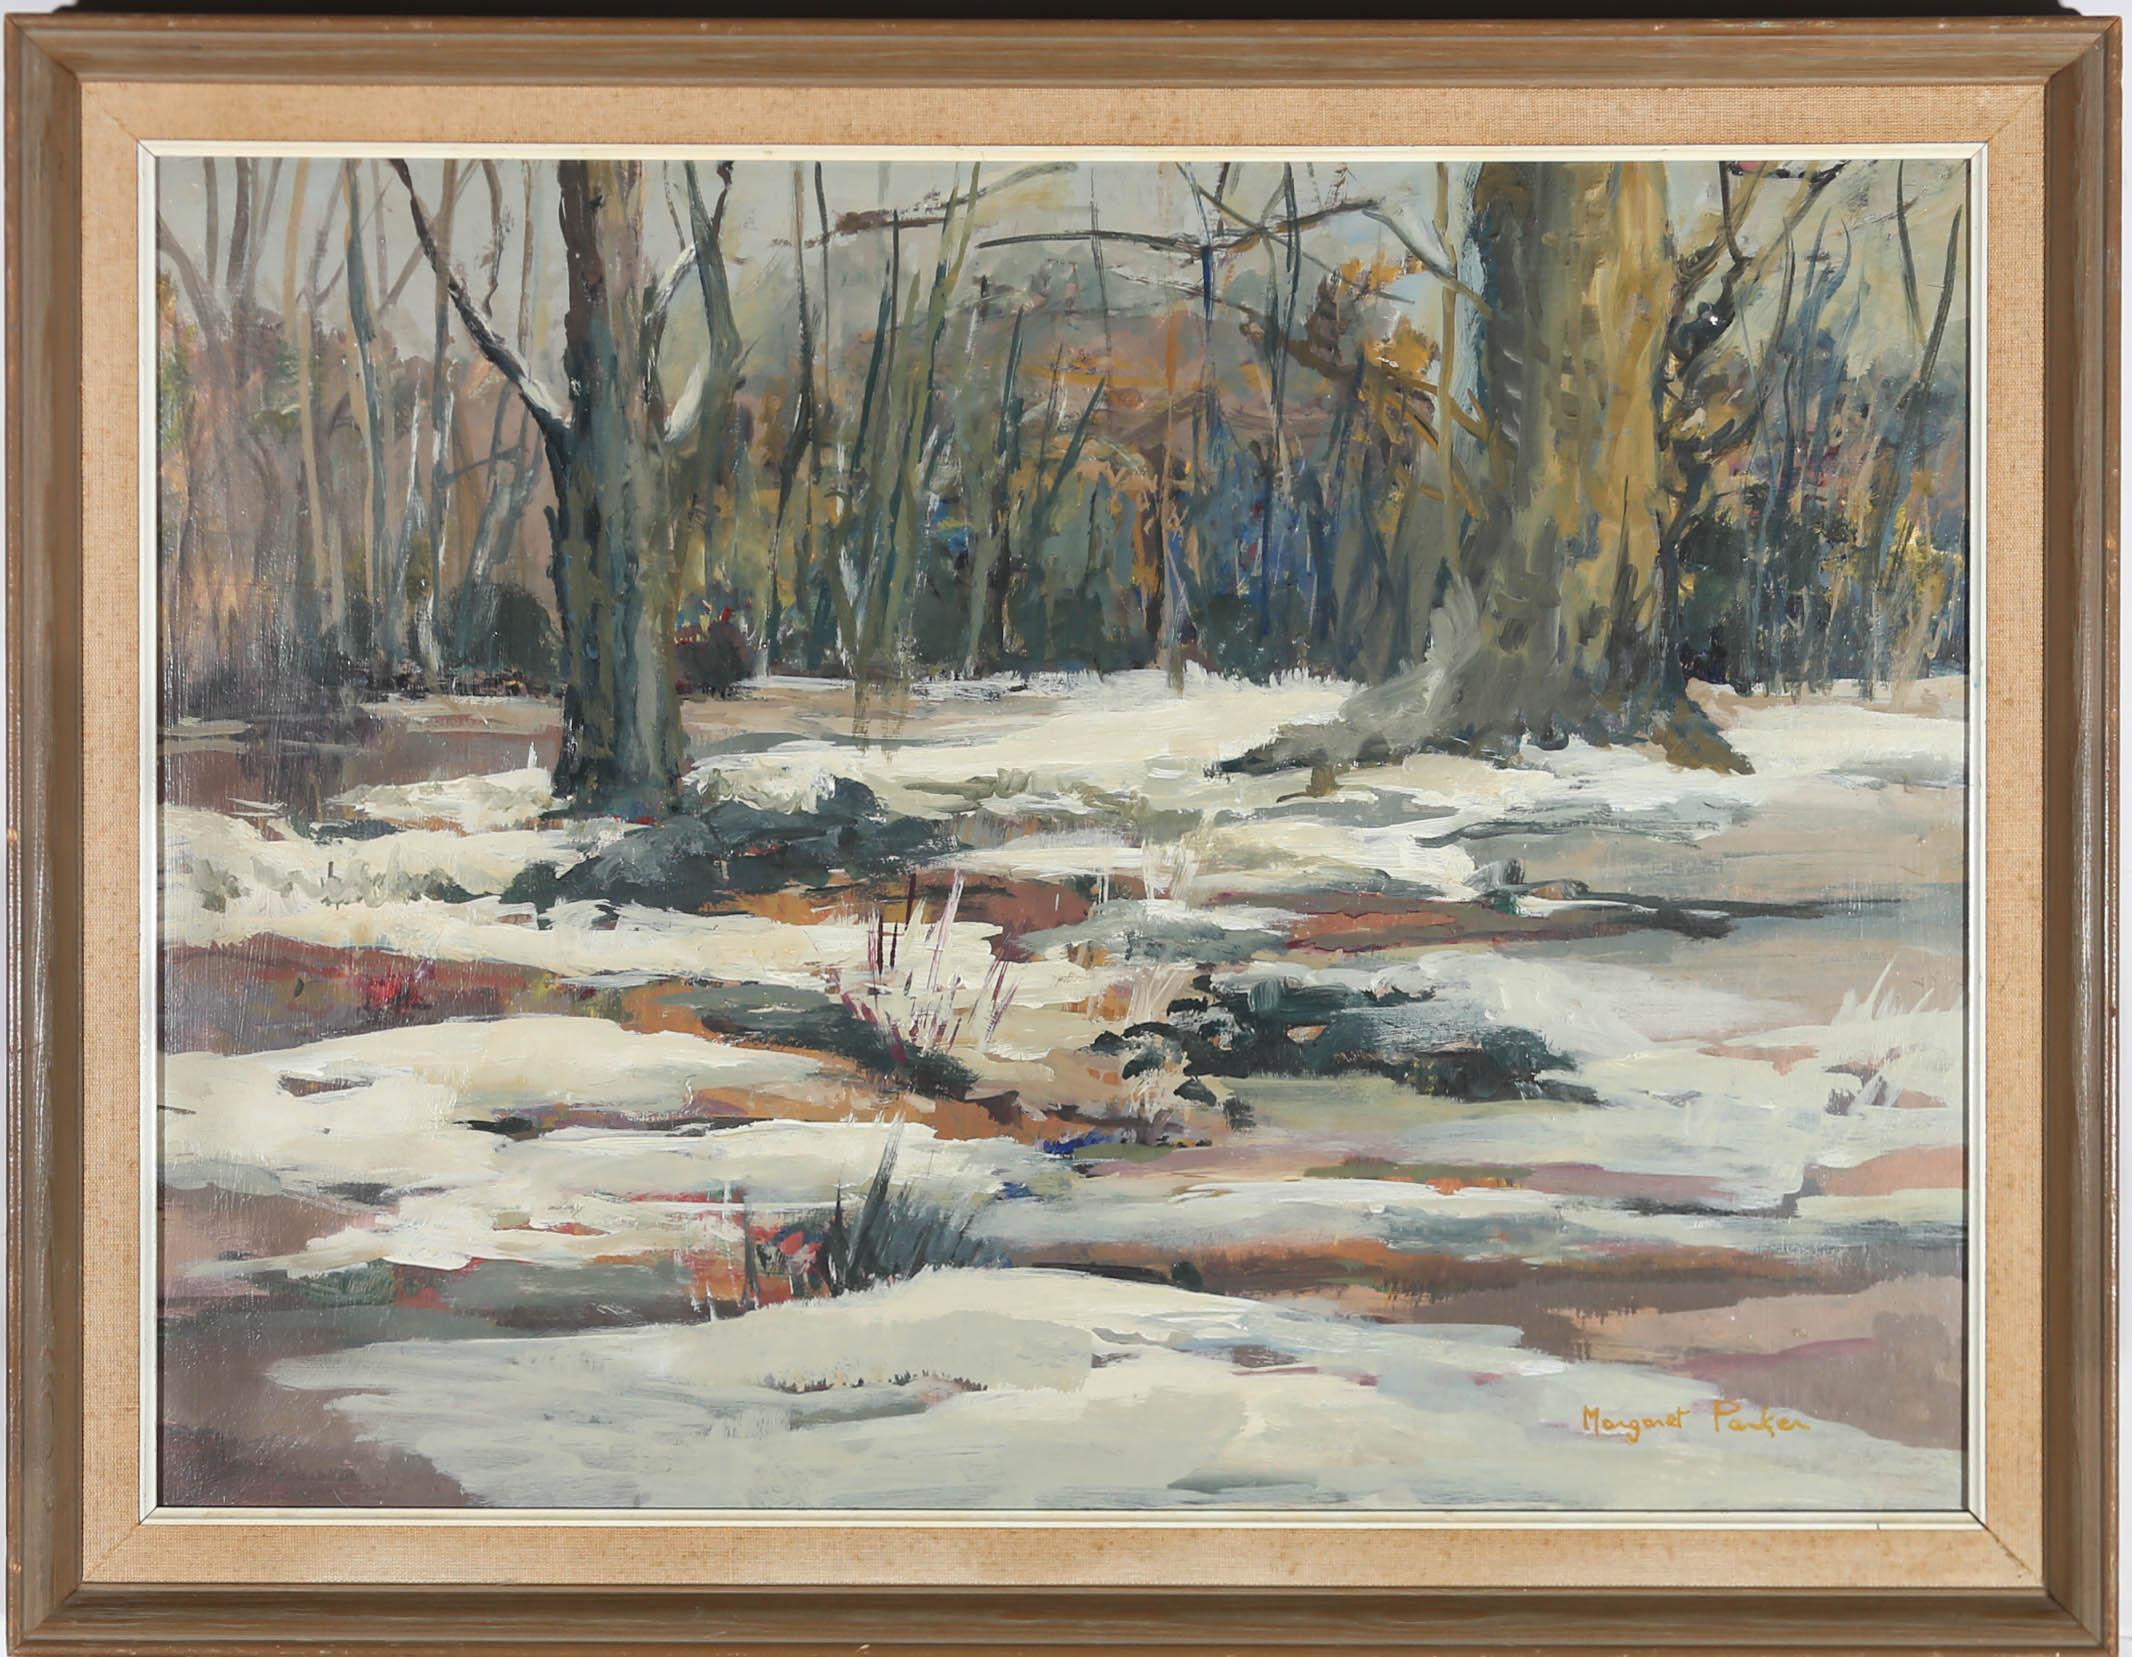 A delightful winter scene depicting deep woodland lightly covered in thawing snow. Painting using gestural brushstrokes and a natural palette. Signed to the lower right. Titled verso. Presented in a wooden frame with a cotton slip. On board.